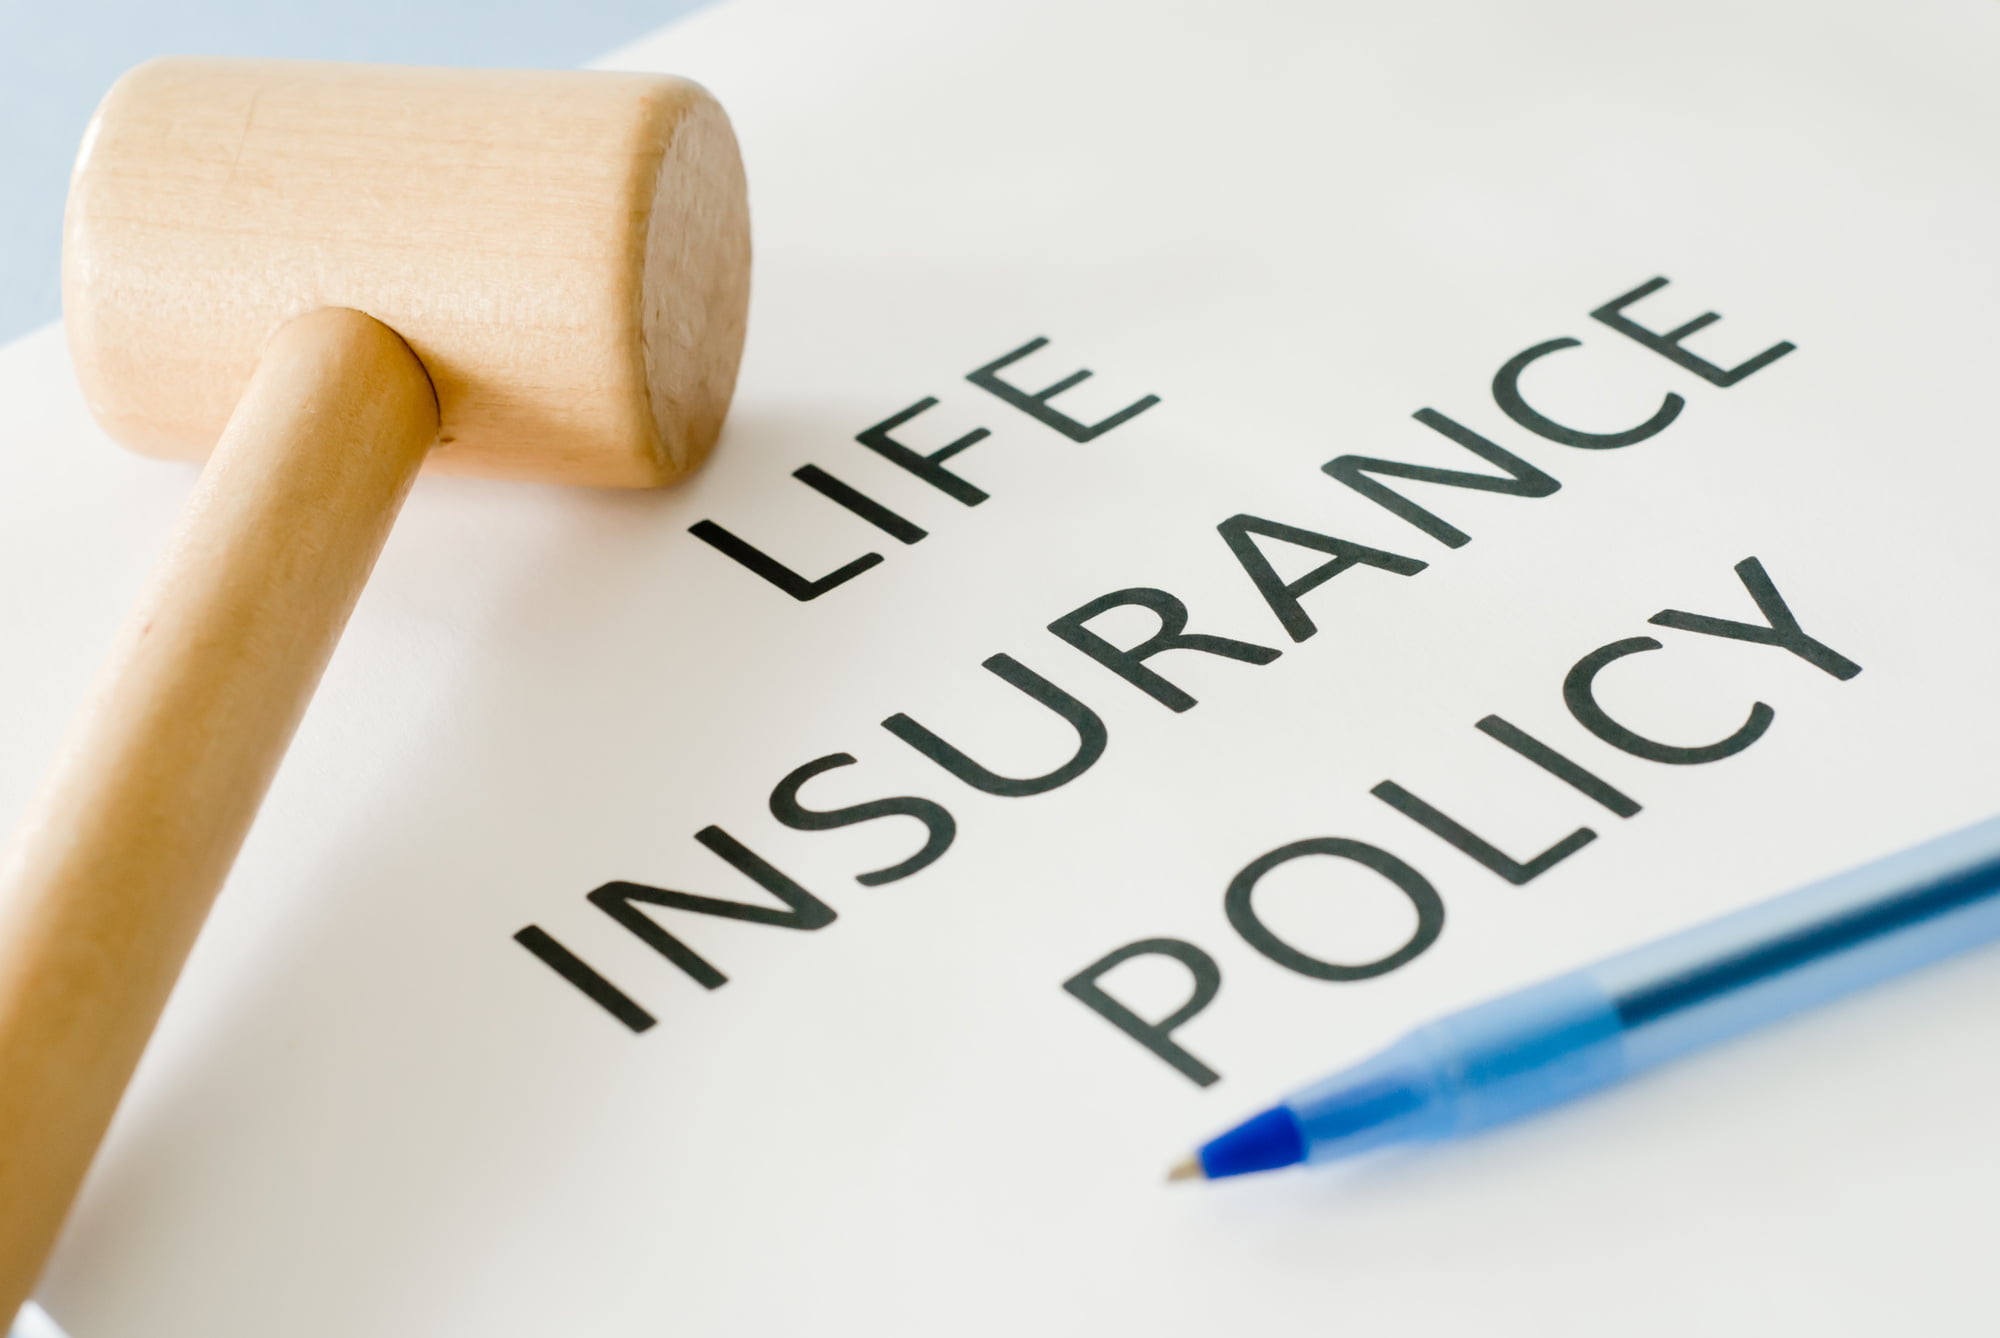 Permanent life insurance vs term: How much do you know about the differences between the two? Read on to learn more about the differences between them.